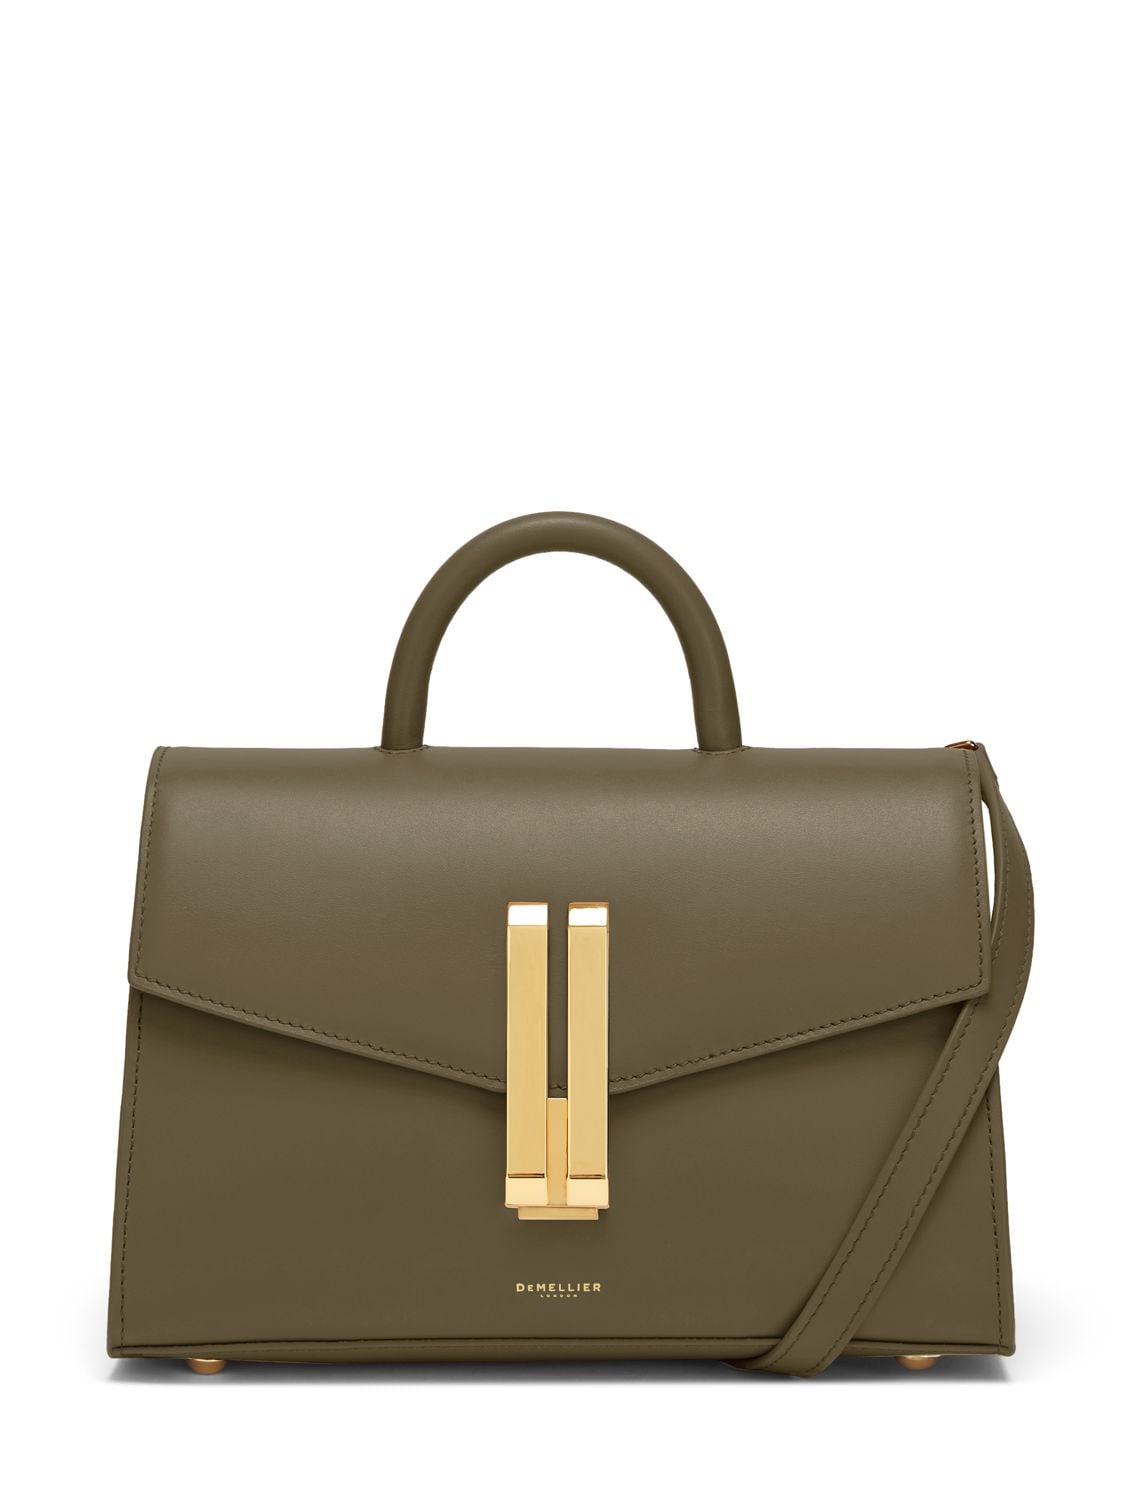 Demellier Midi Montreal Smooth Leather Bag In Olive/gold